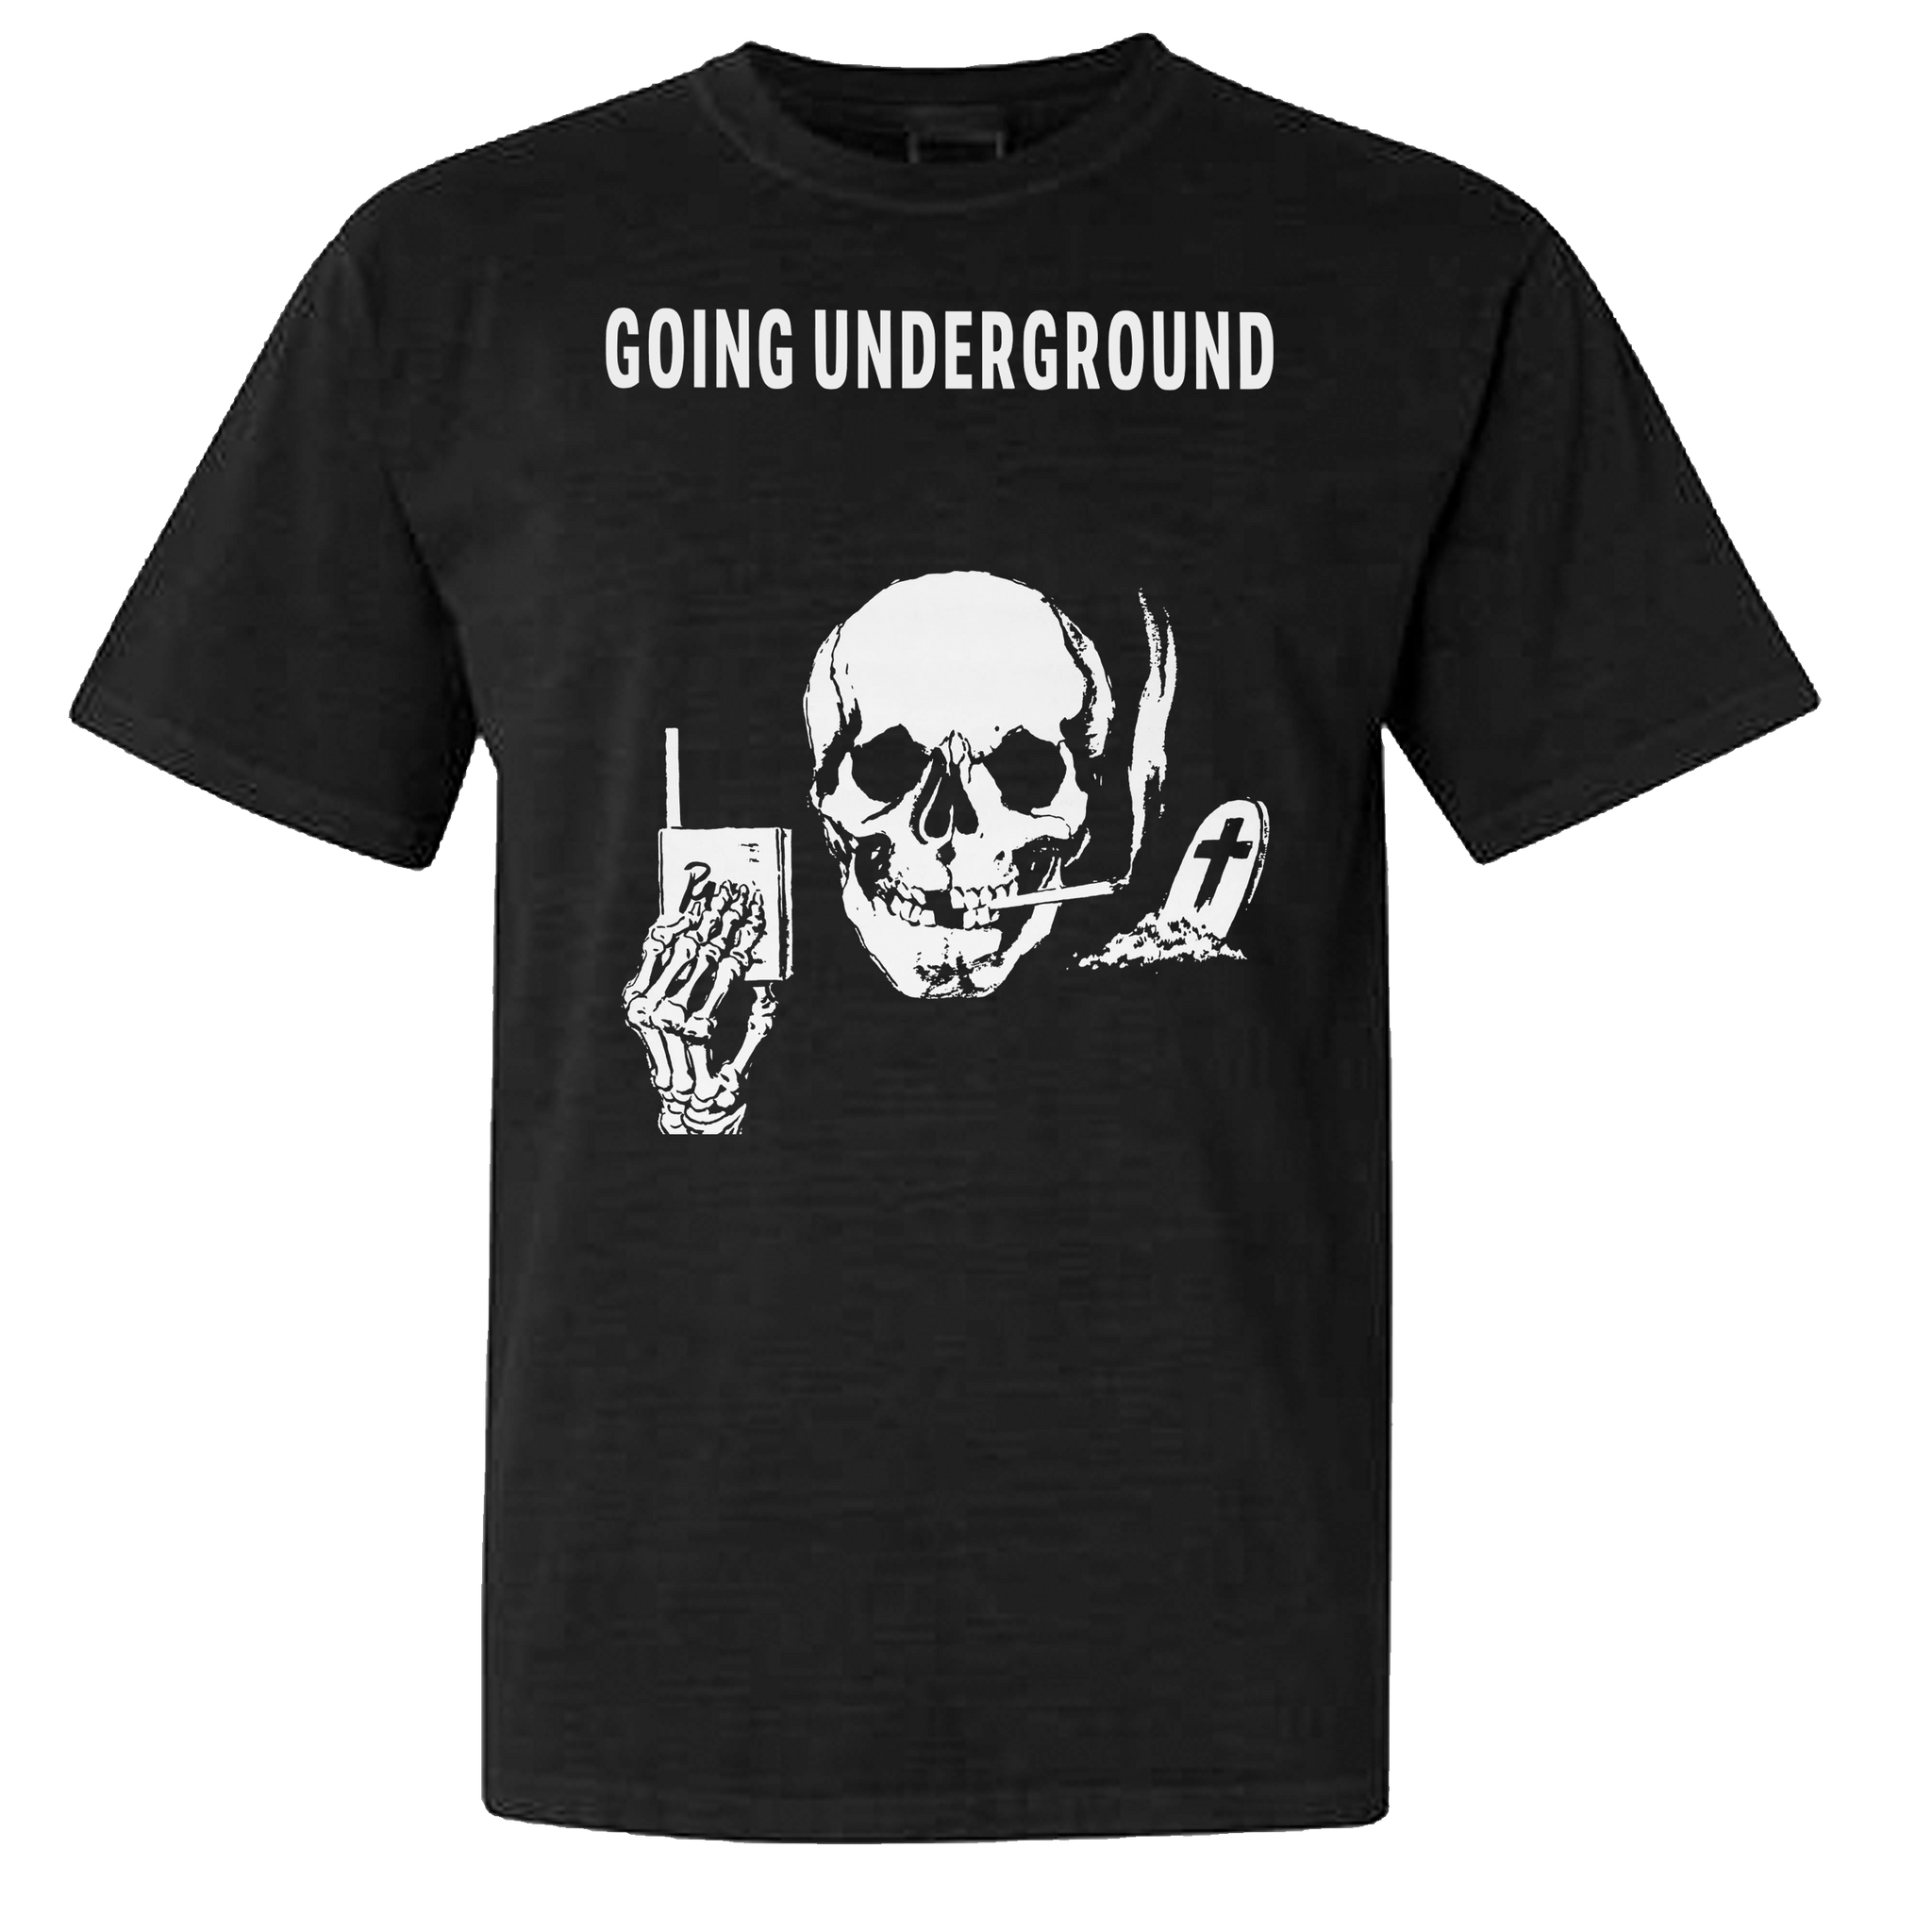 GOING UNDERGROUND - HAVE ANOTHER Shirt